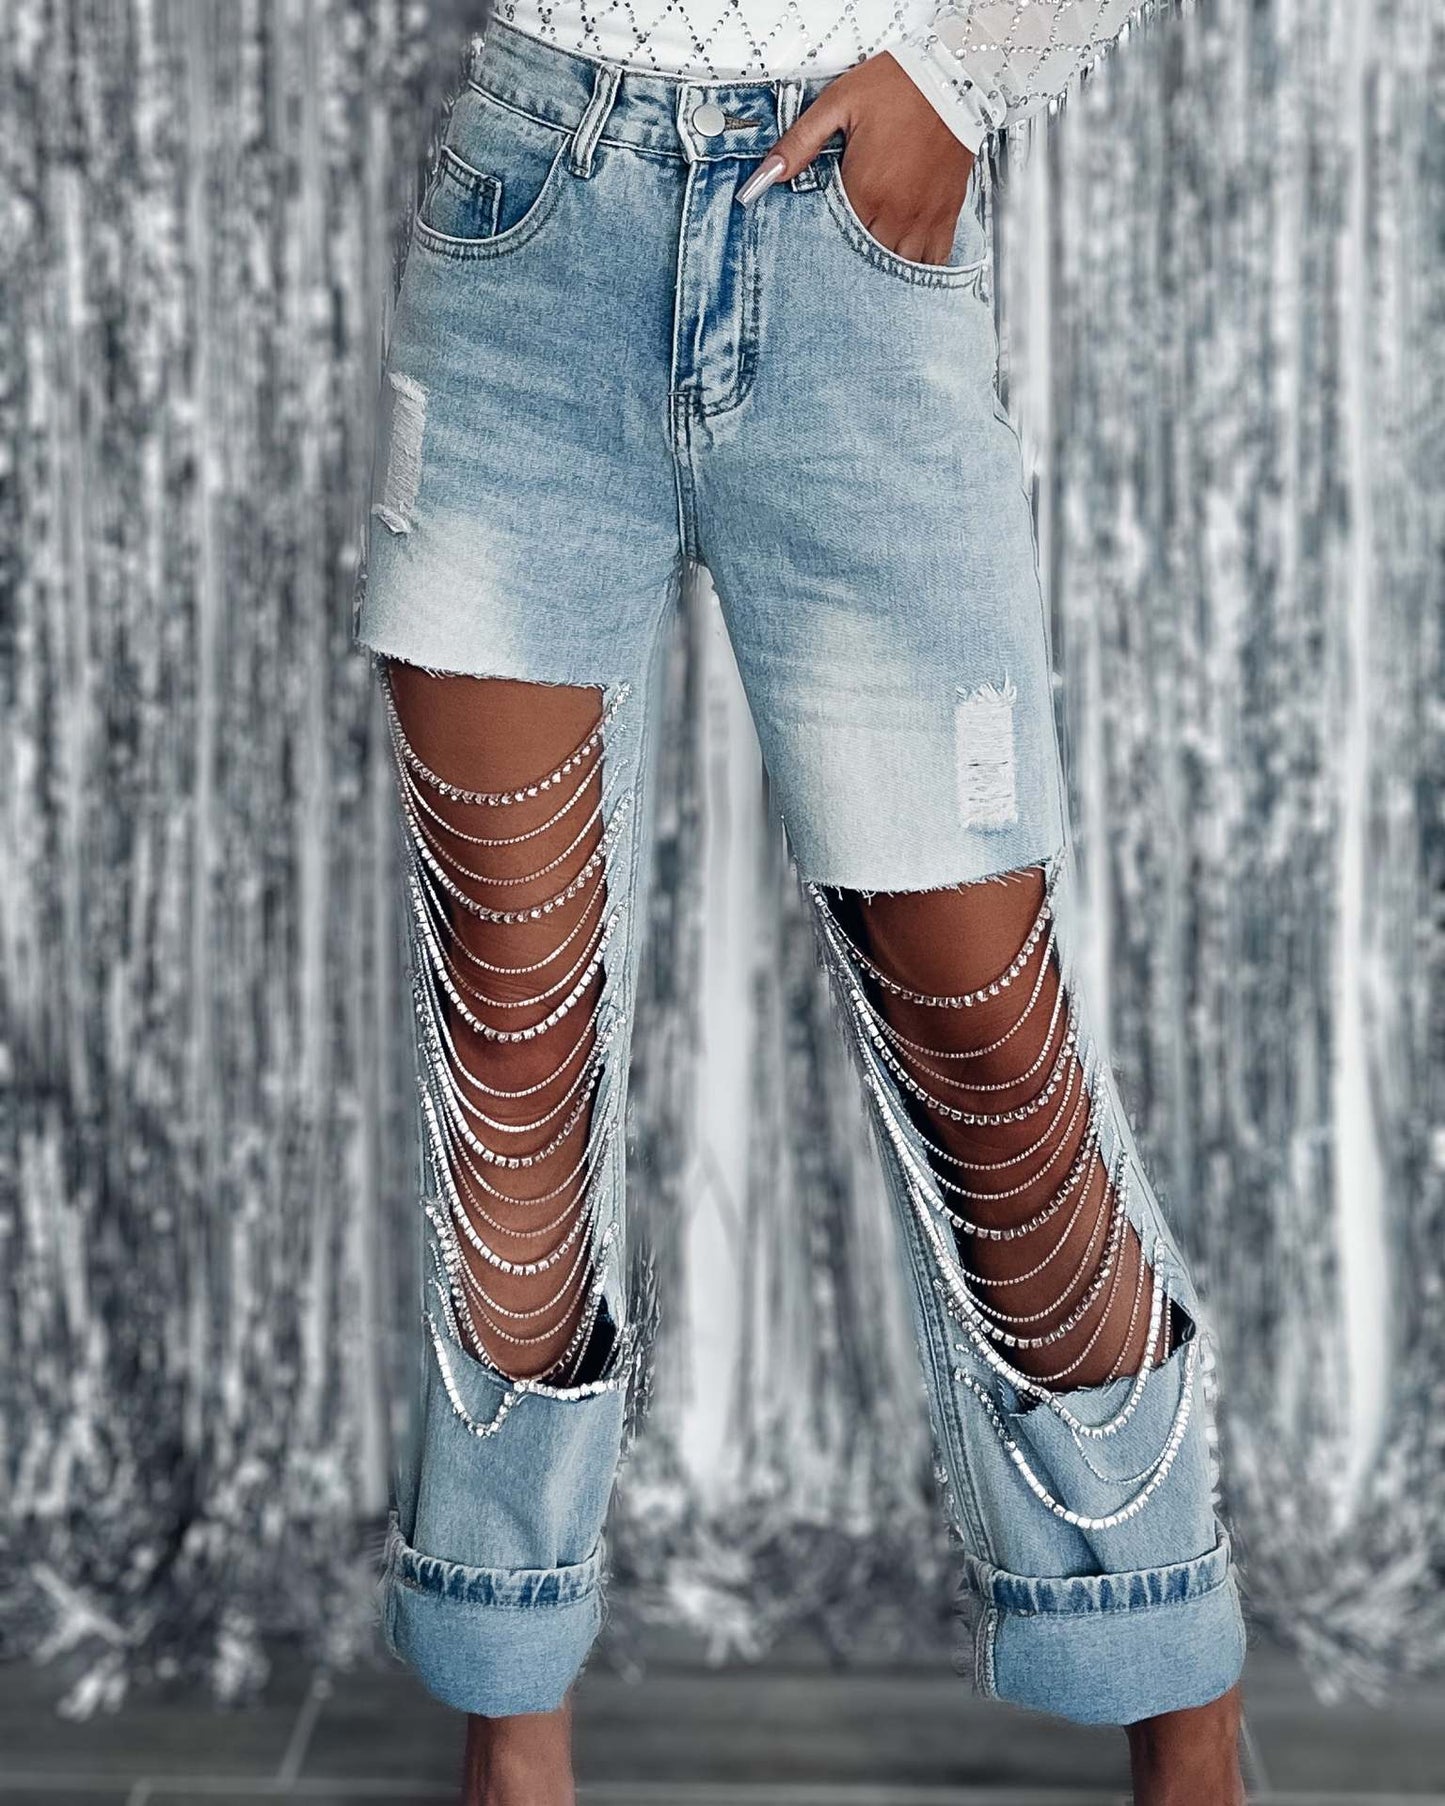 Early Spring Big Ripped Jeans Women Chain Ornaments Straight Leg Pants